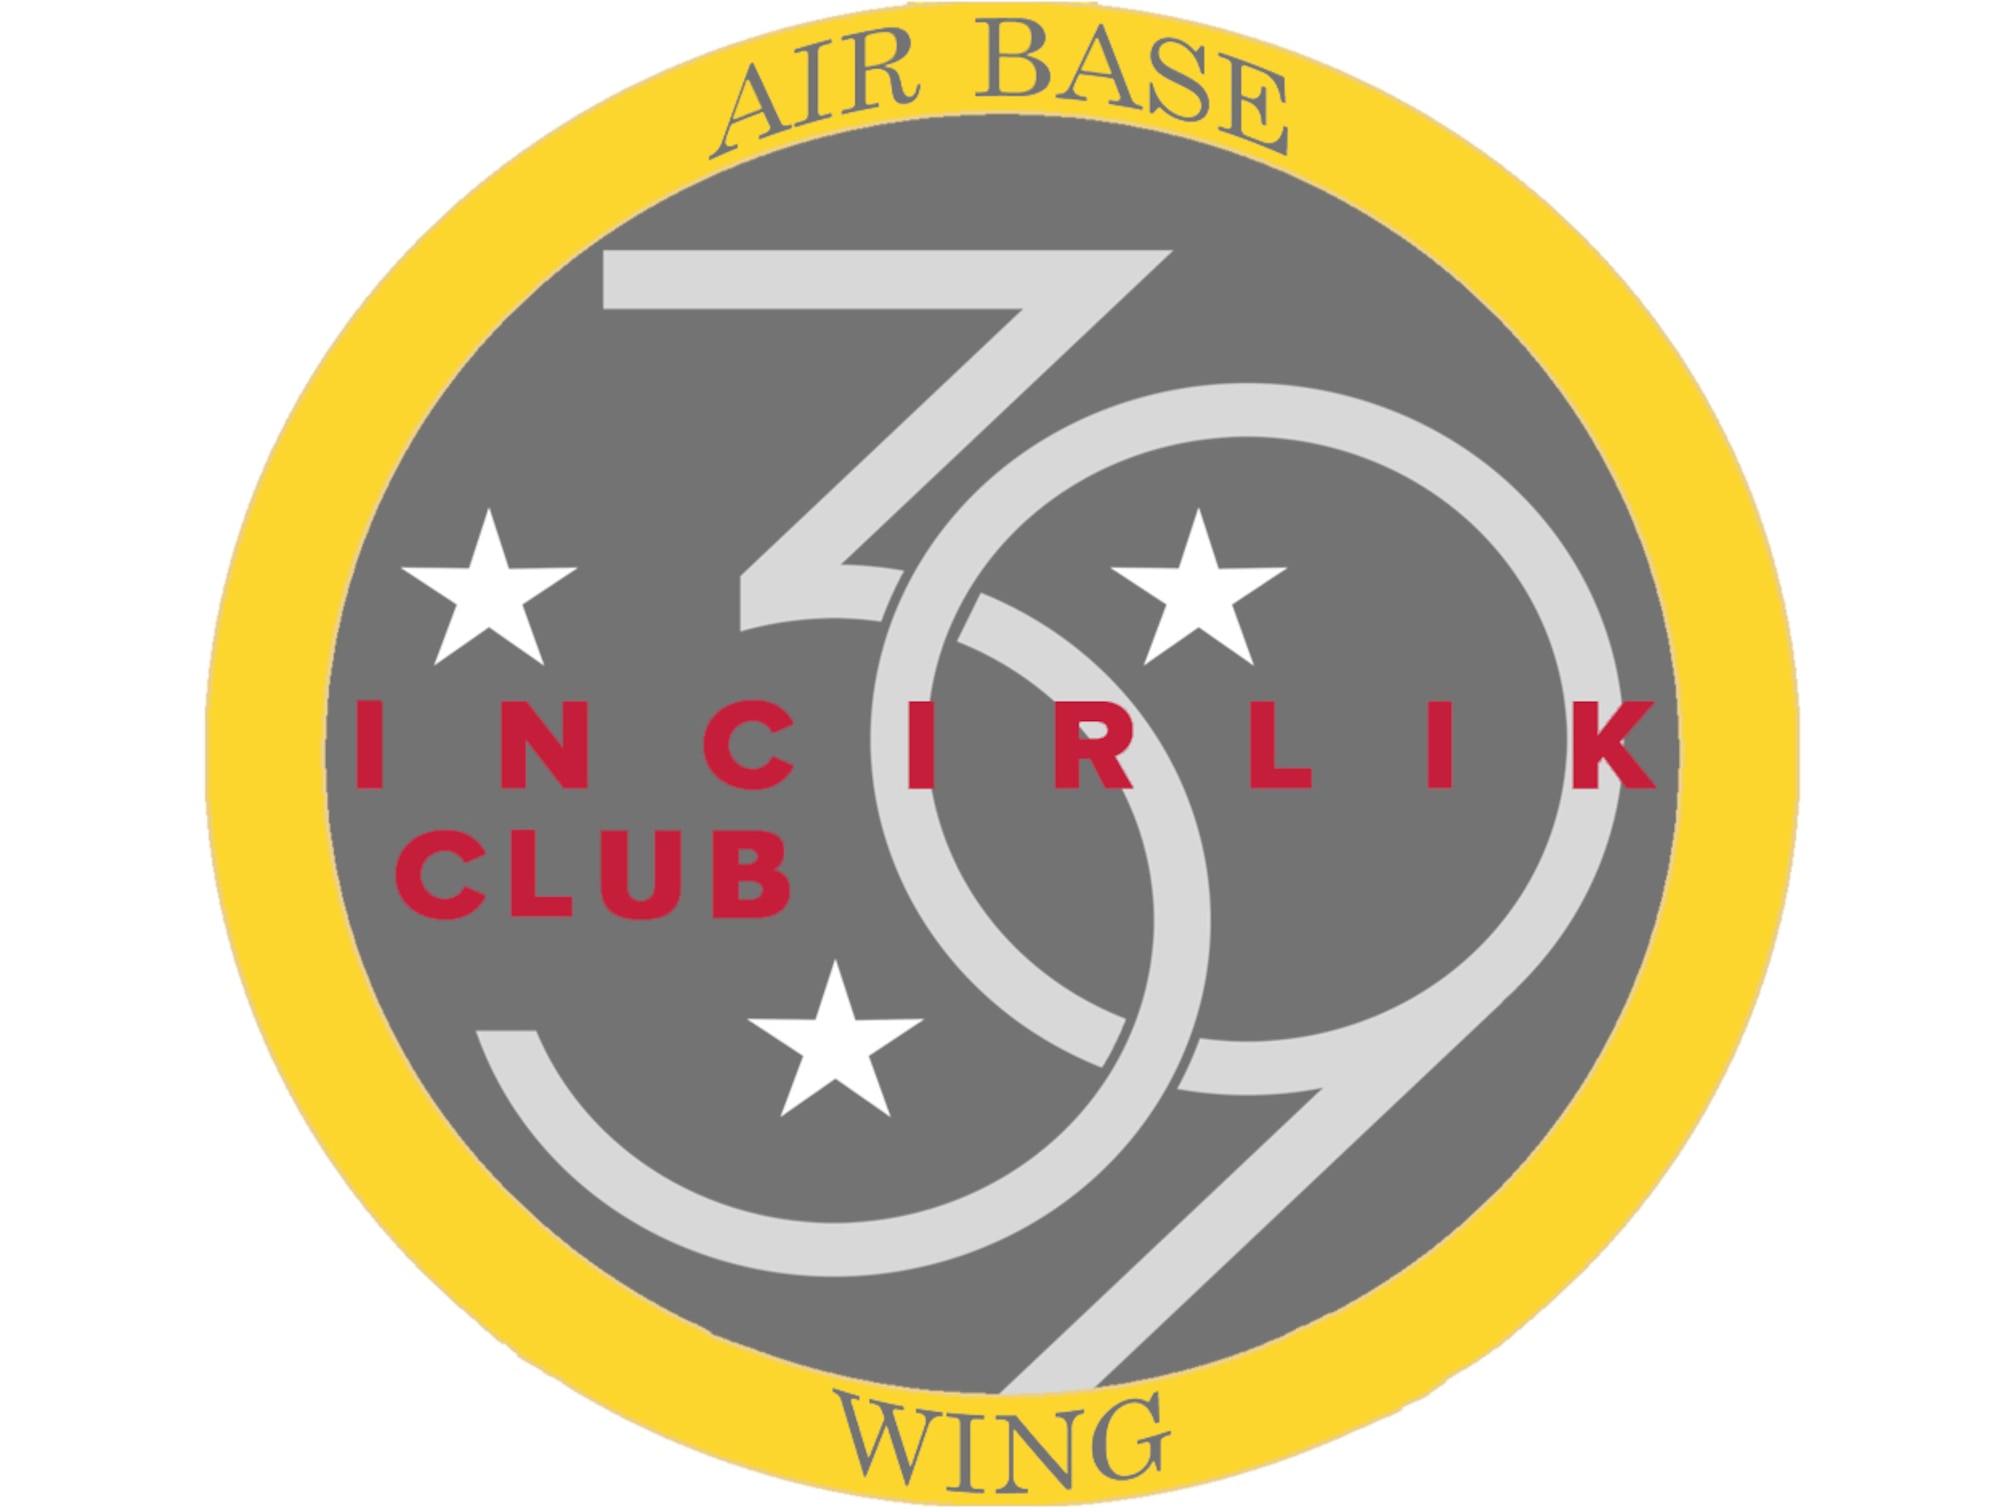 On Feb. 4, 2014, the 39th Air Base Wing established a recognition program for one of the most select groups on Incirlik Air Base - local nationals within the wing who have contributed nearly four decades or more serving the U.S. Government and supporting the NATO alliance in Turkey. (U.S. Air Force graphic by Airman Cory W. Bush)